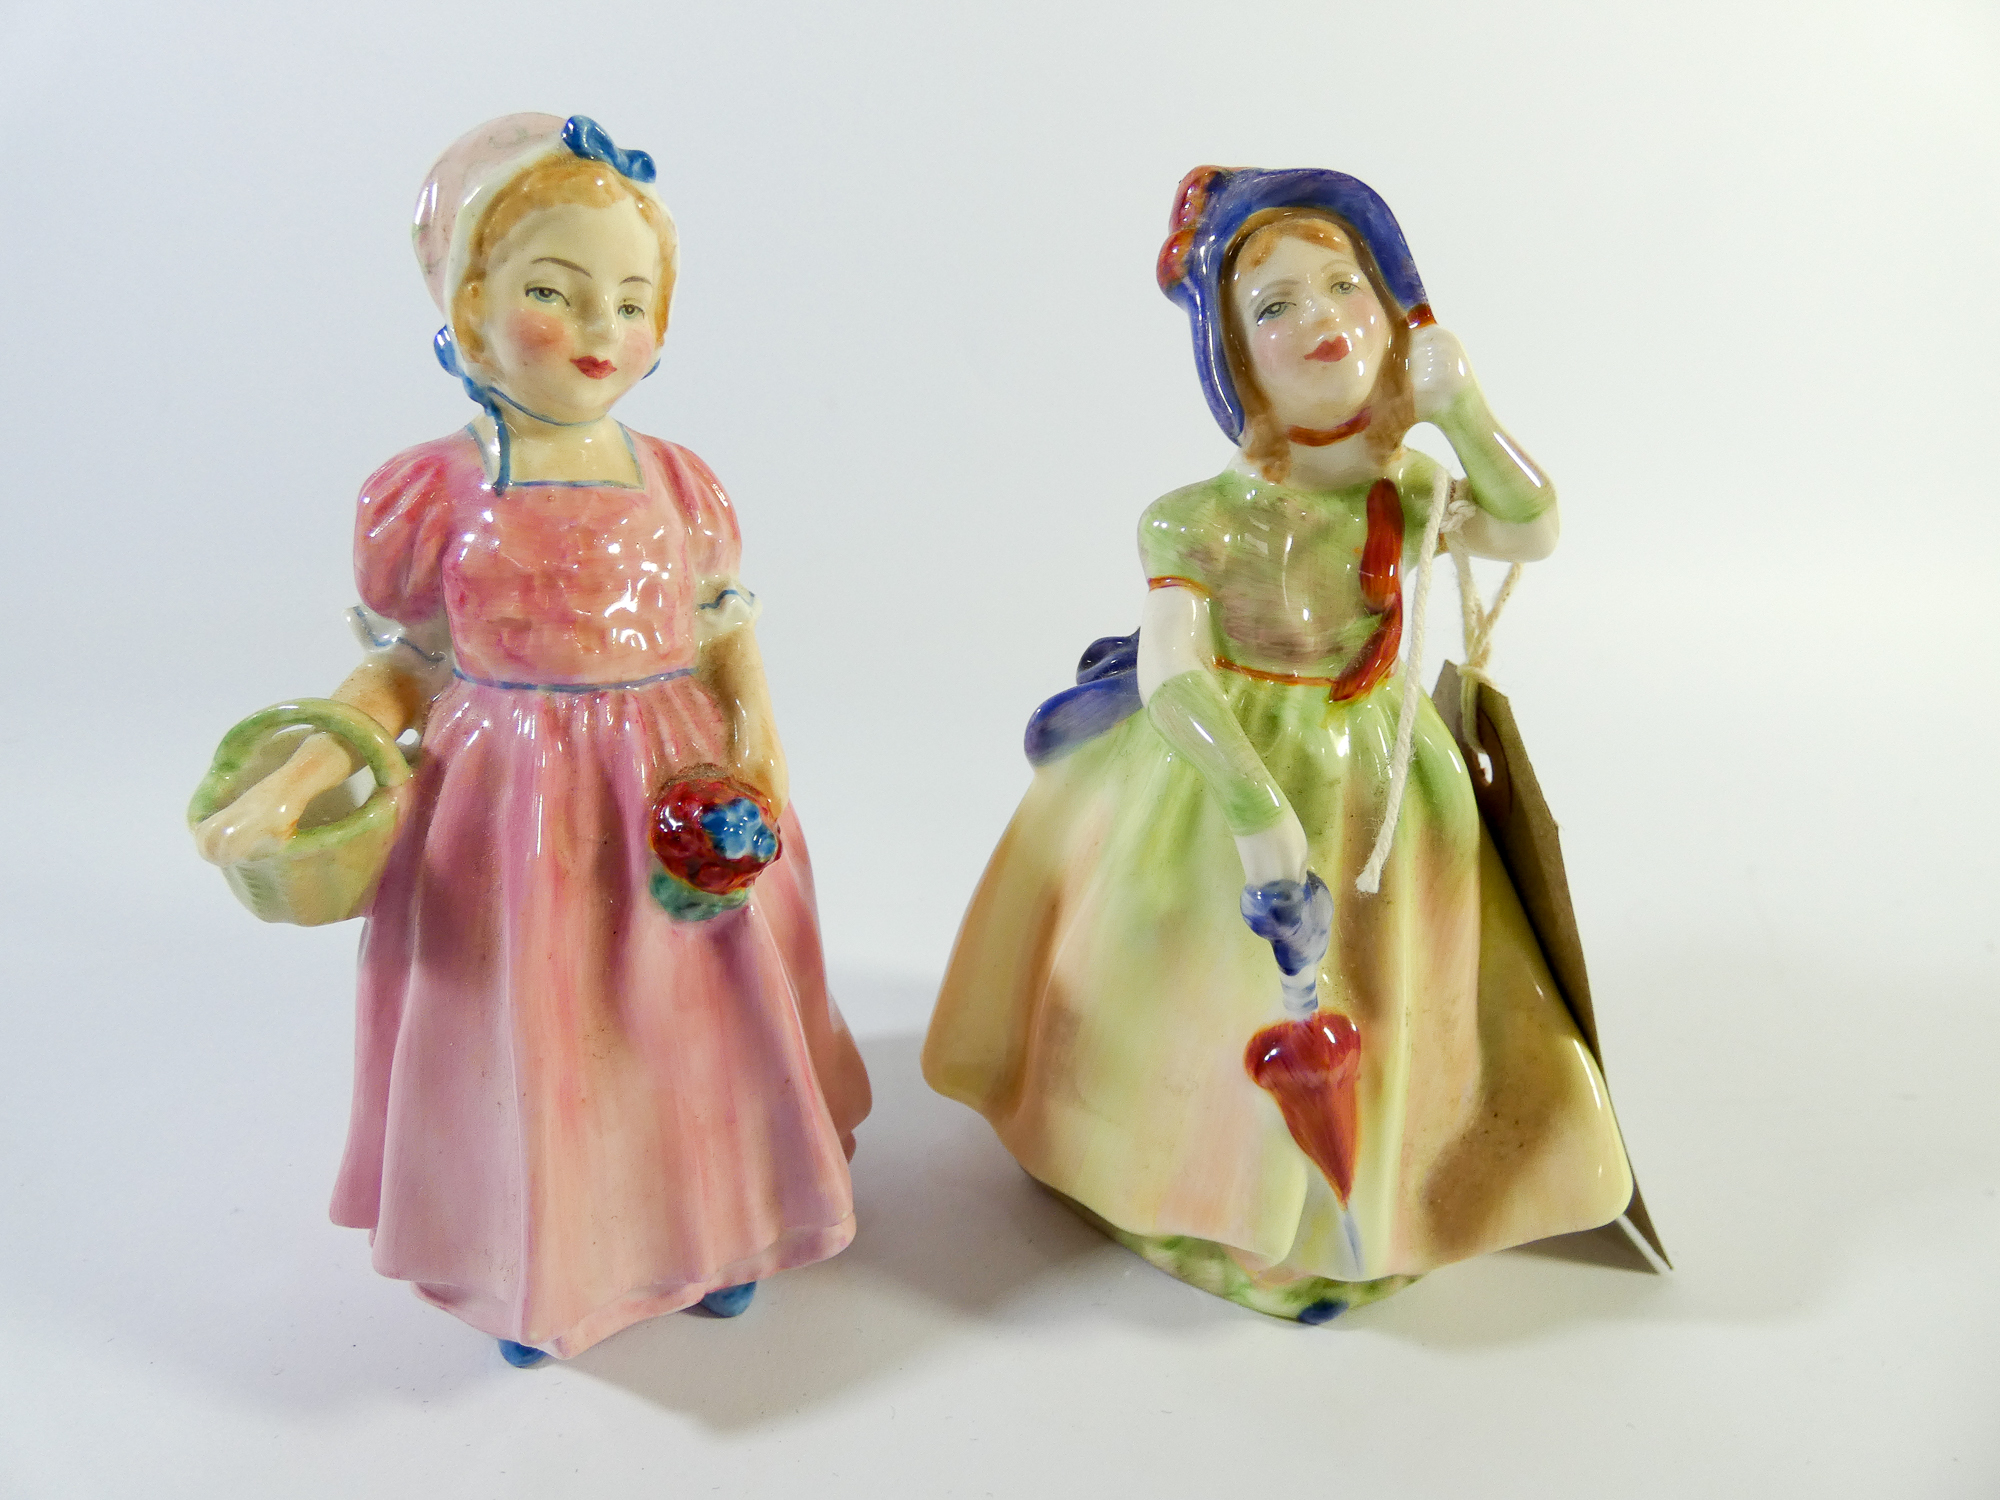 A small Royal Doulton figure 'Tinkle Bell' and another Babie